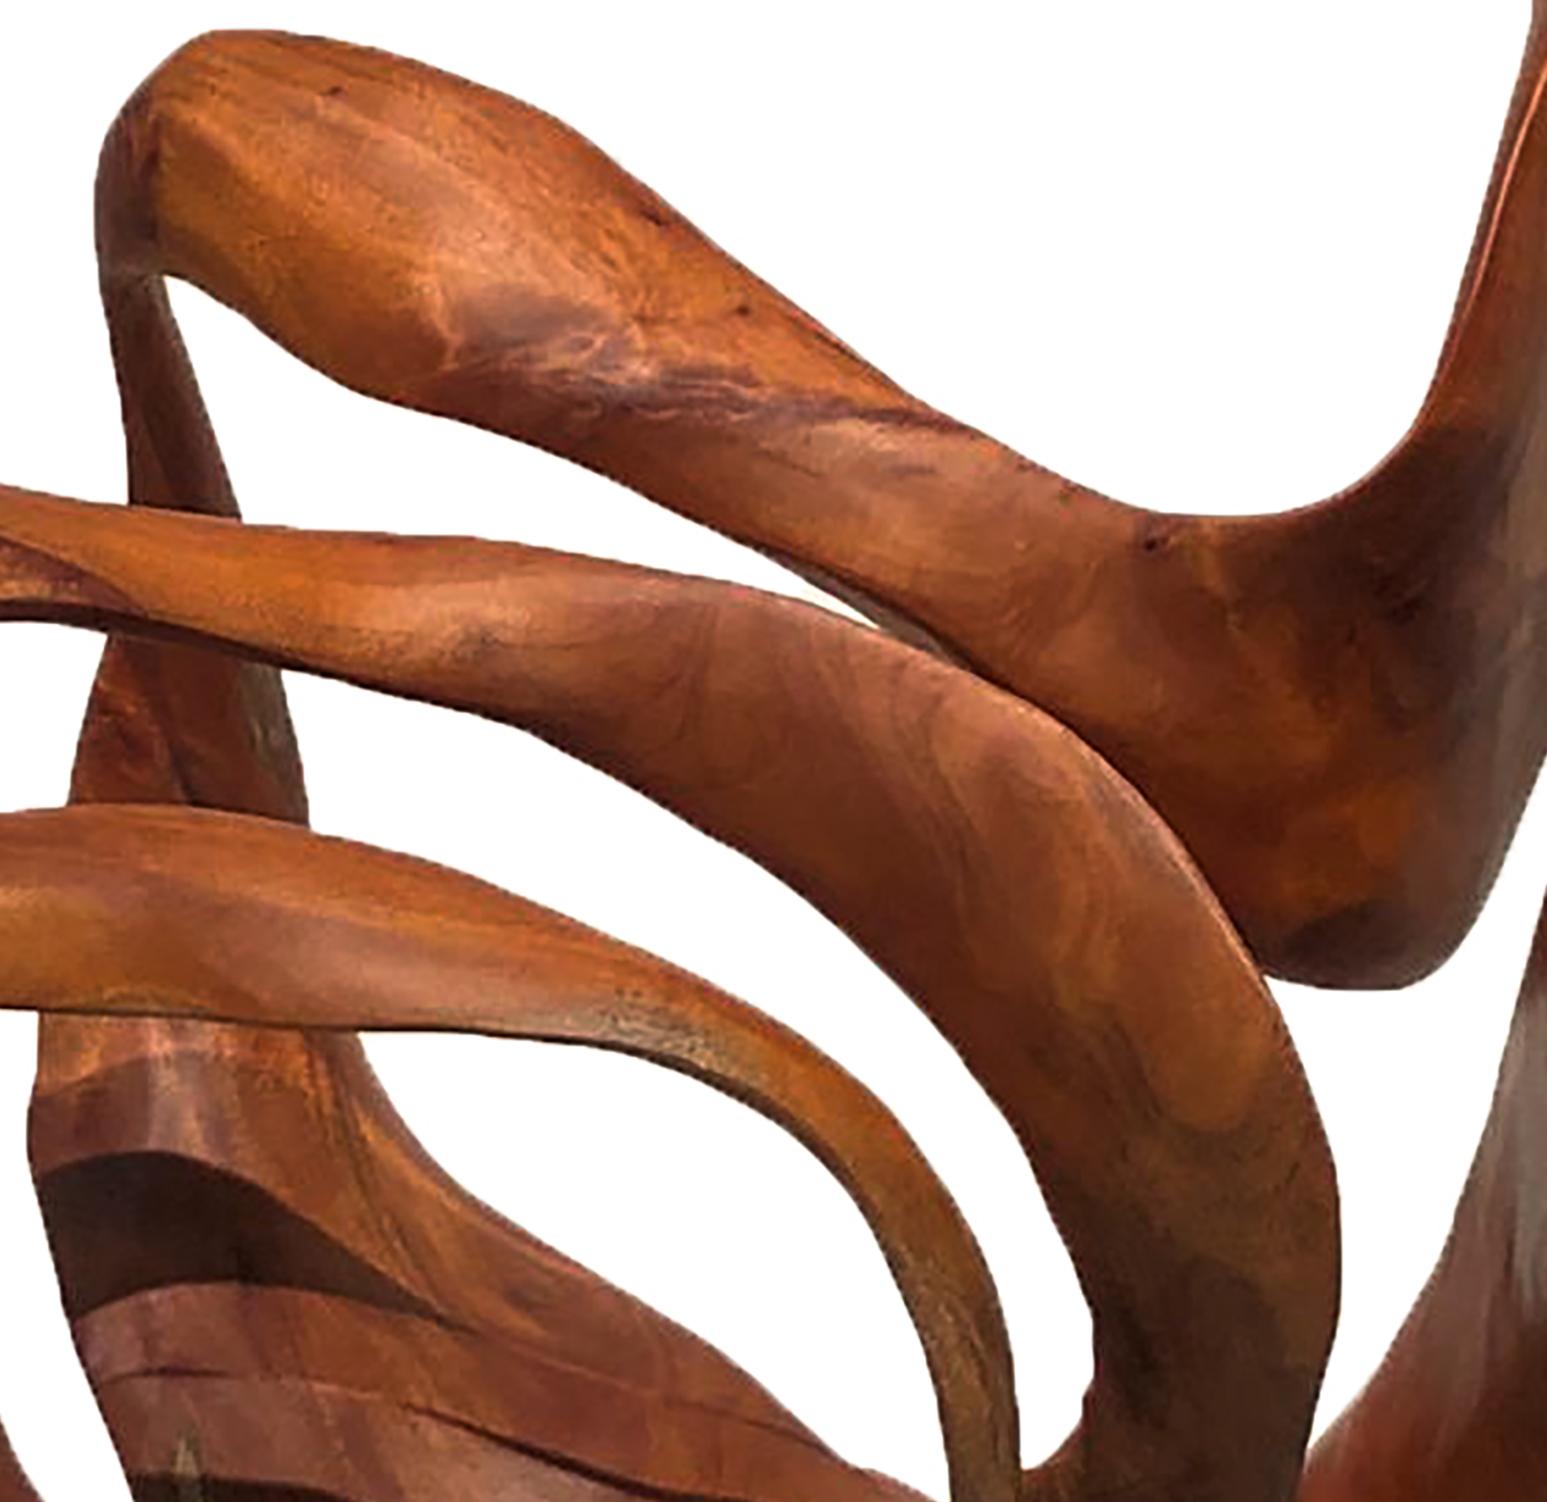 Equilibri - 21st Century, Contemporary, Abstract Sculpture, Mahogany Wood, Root 2